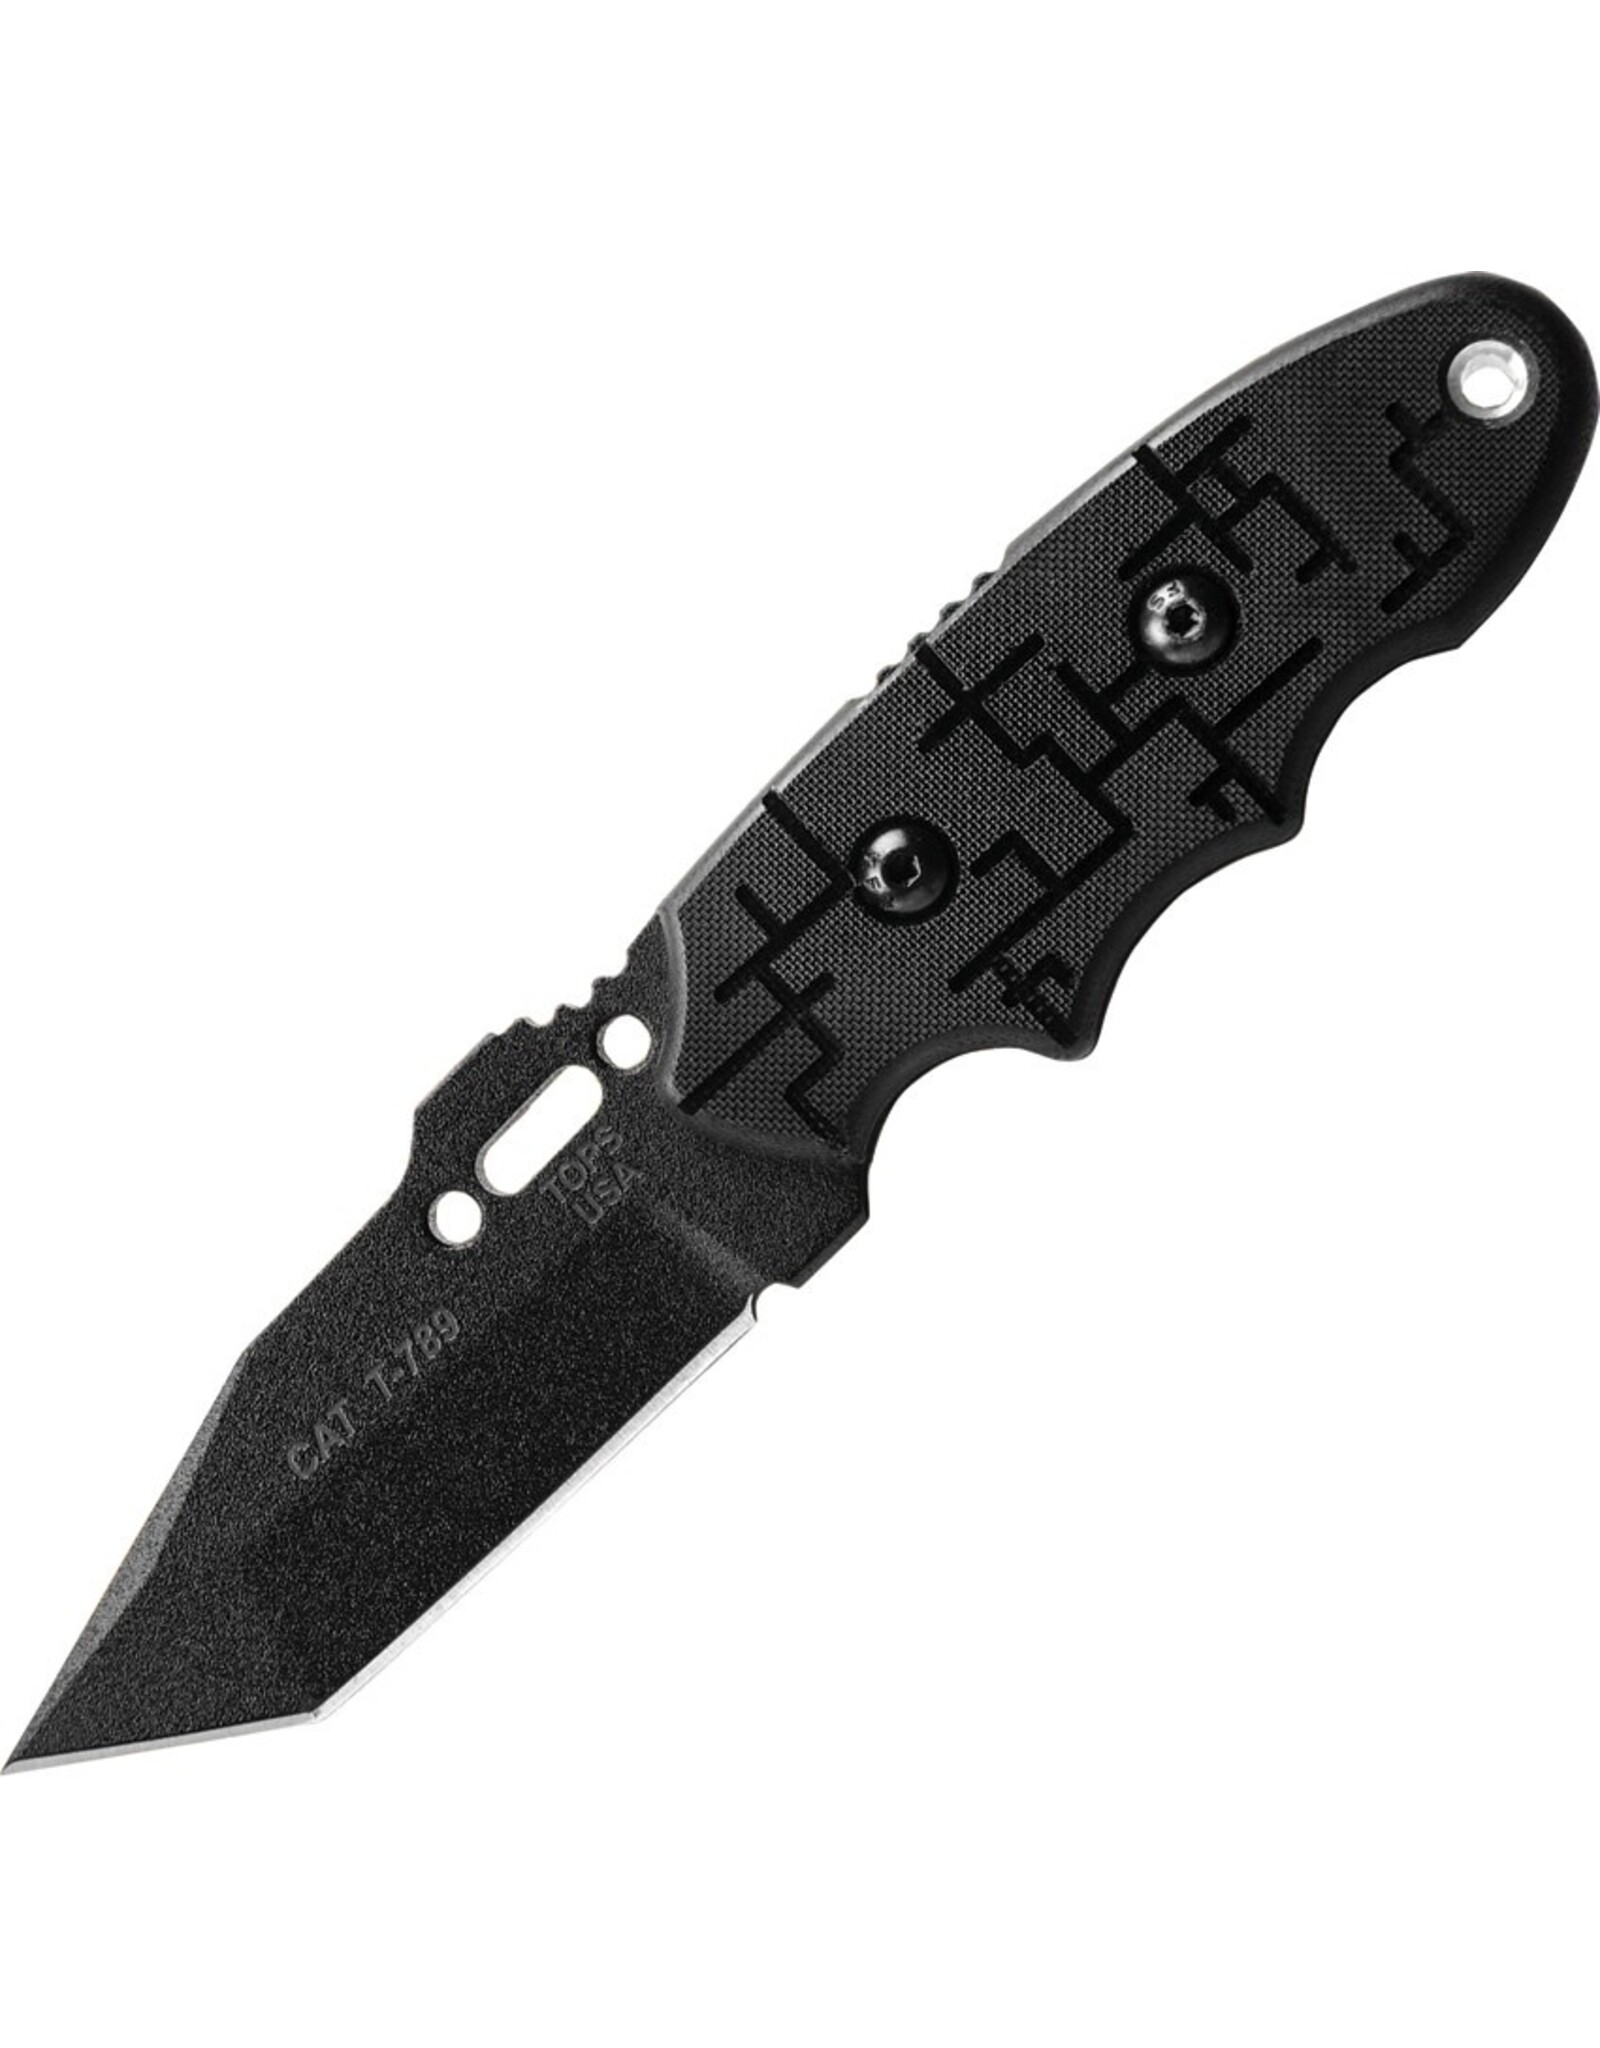 TOPS Knives CAT Covert Anti-Terrorism 3.25" 1095 Tanto Blade, Cryptic Cyber G10 Handles, Kydex Sheath